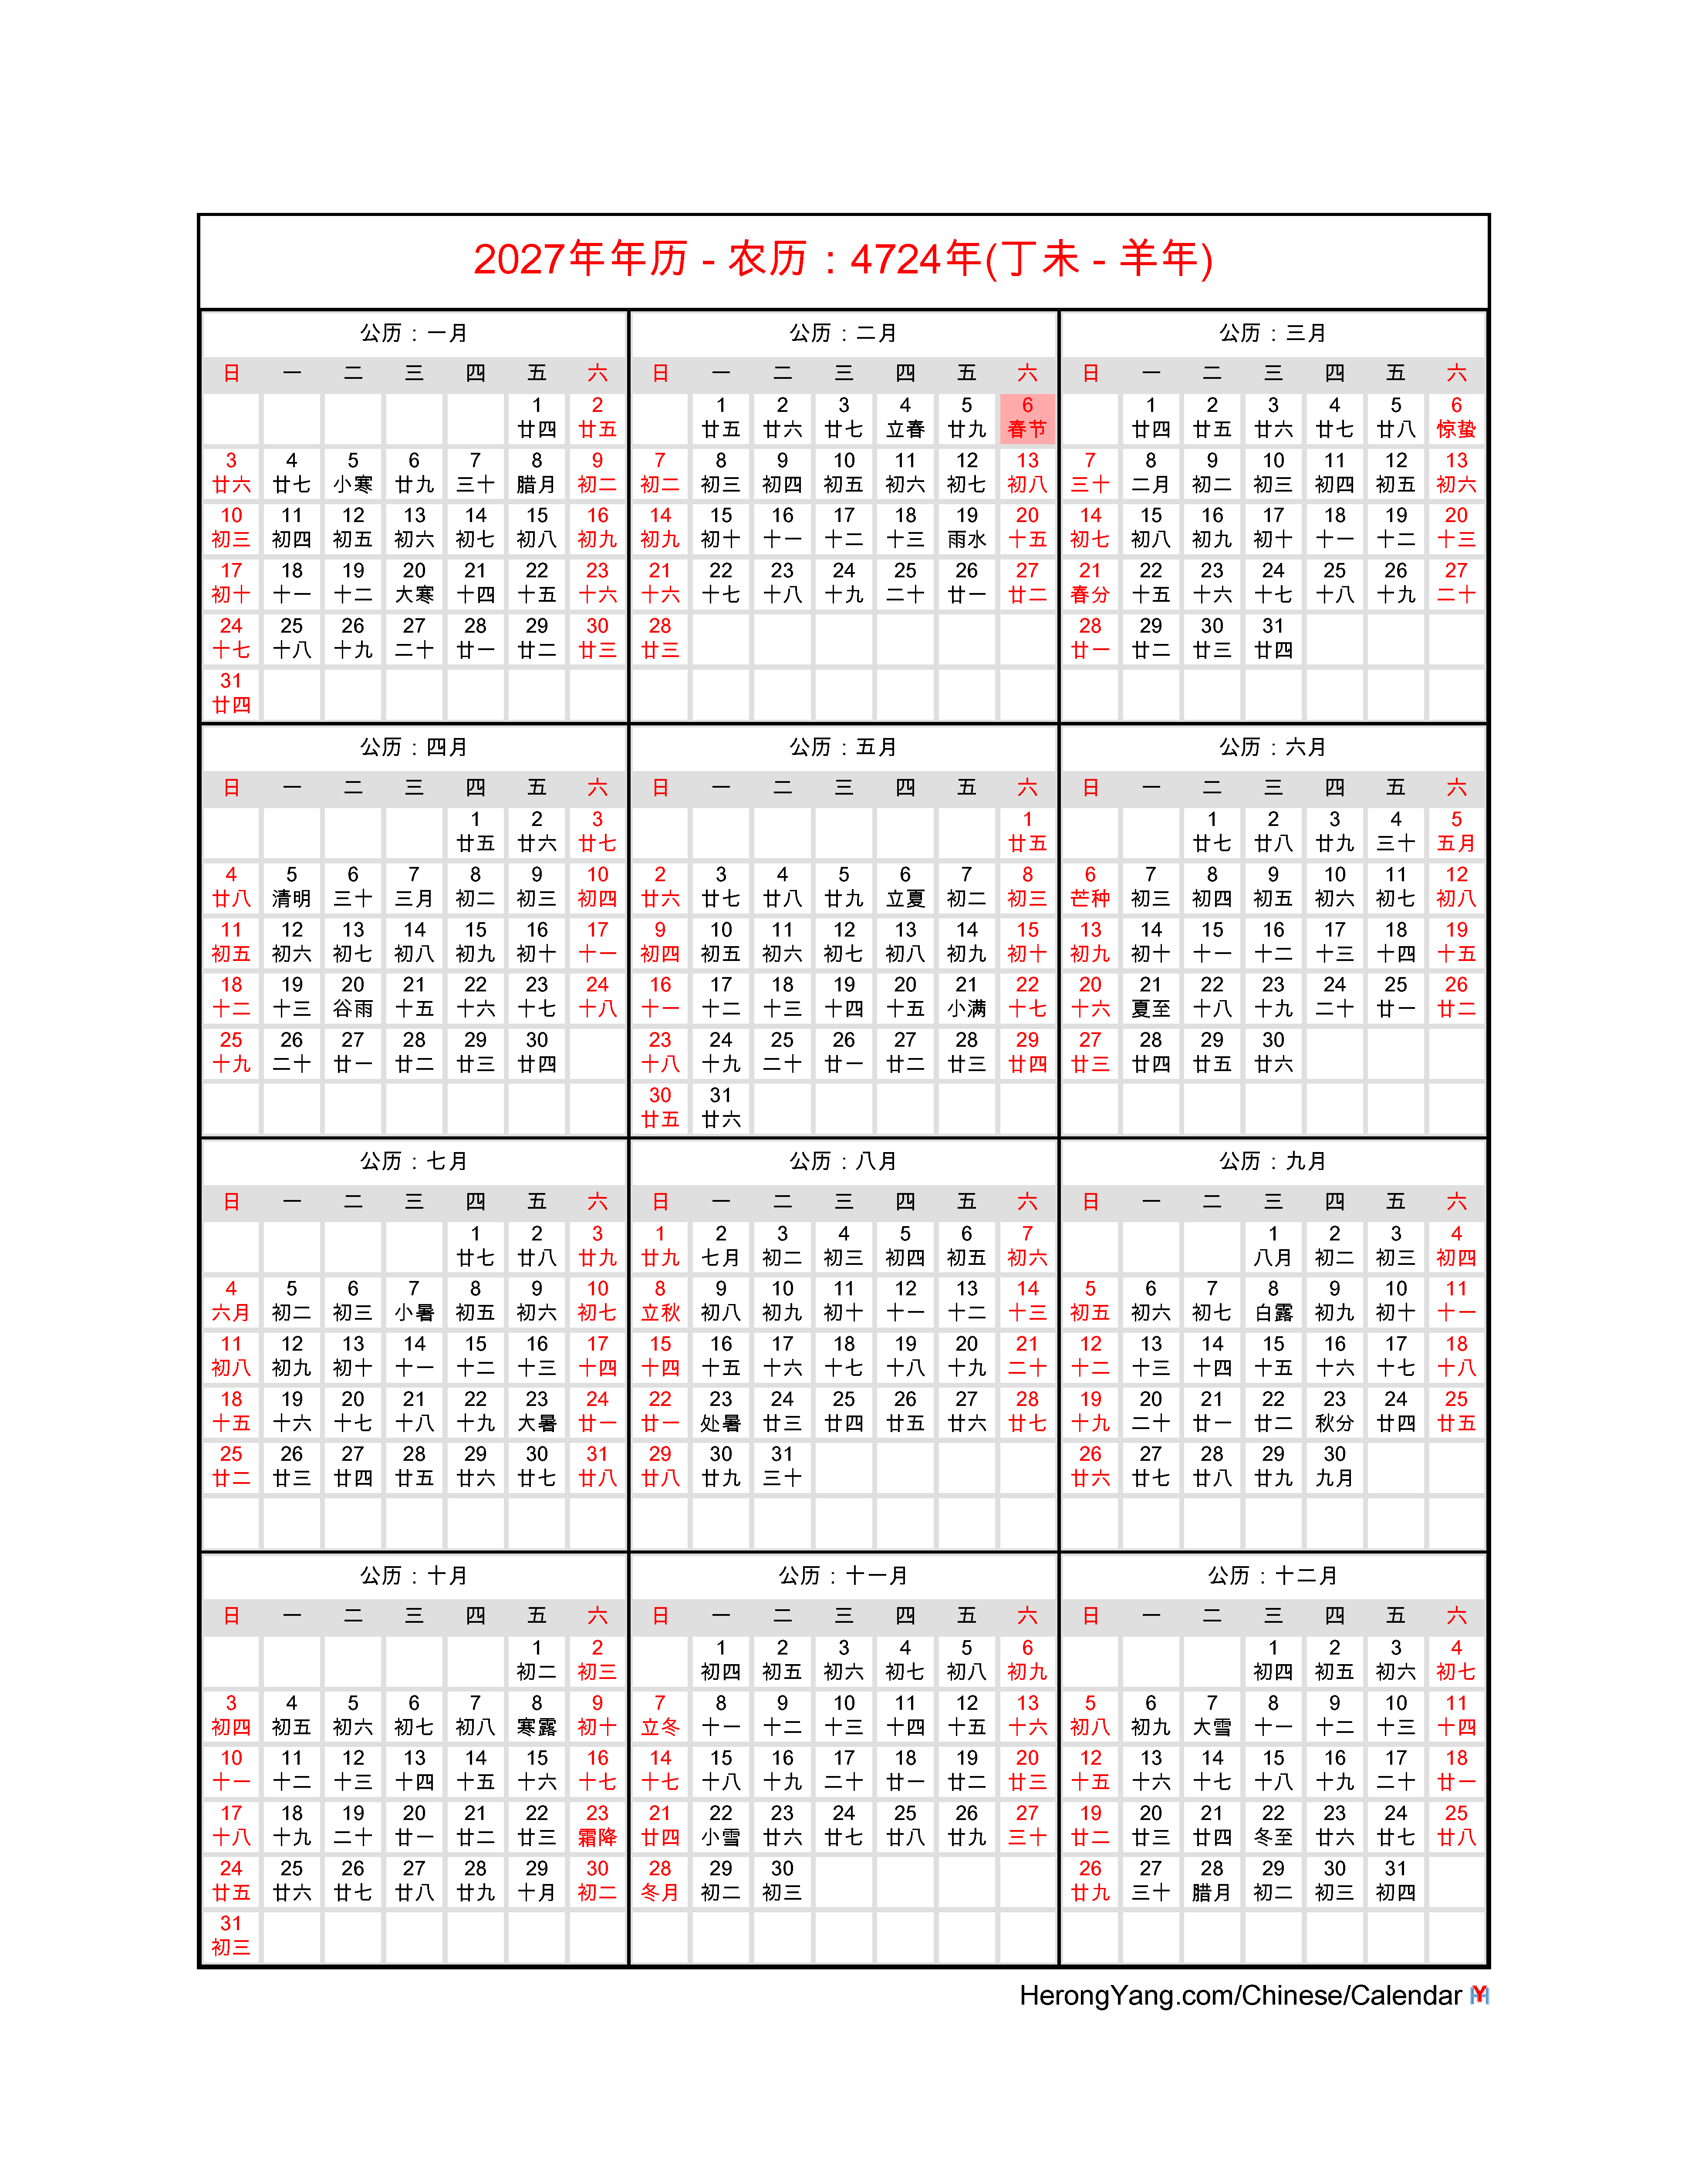 2023 Calendar With Chinese Dates Benefits IMAGESEE